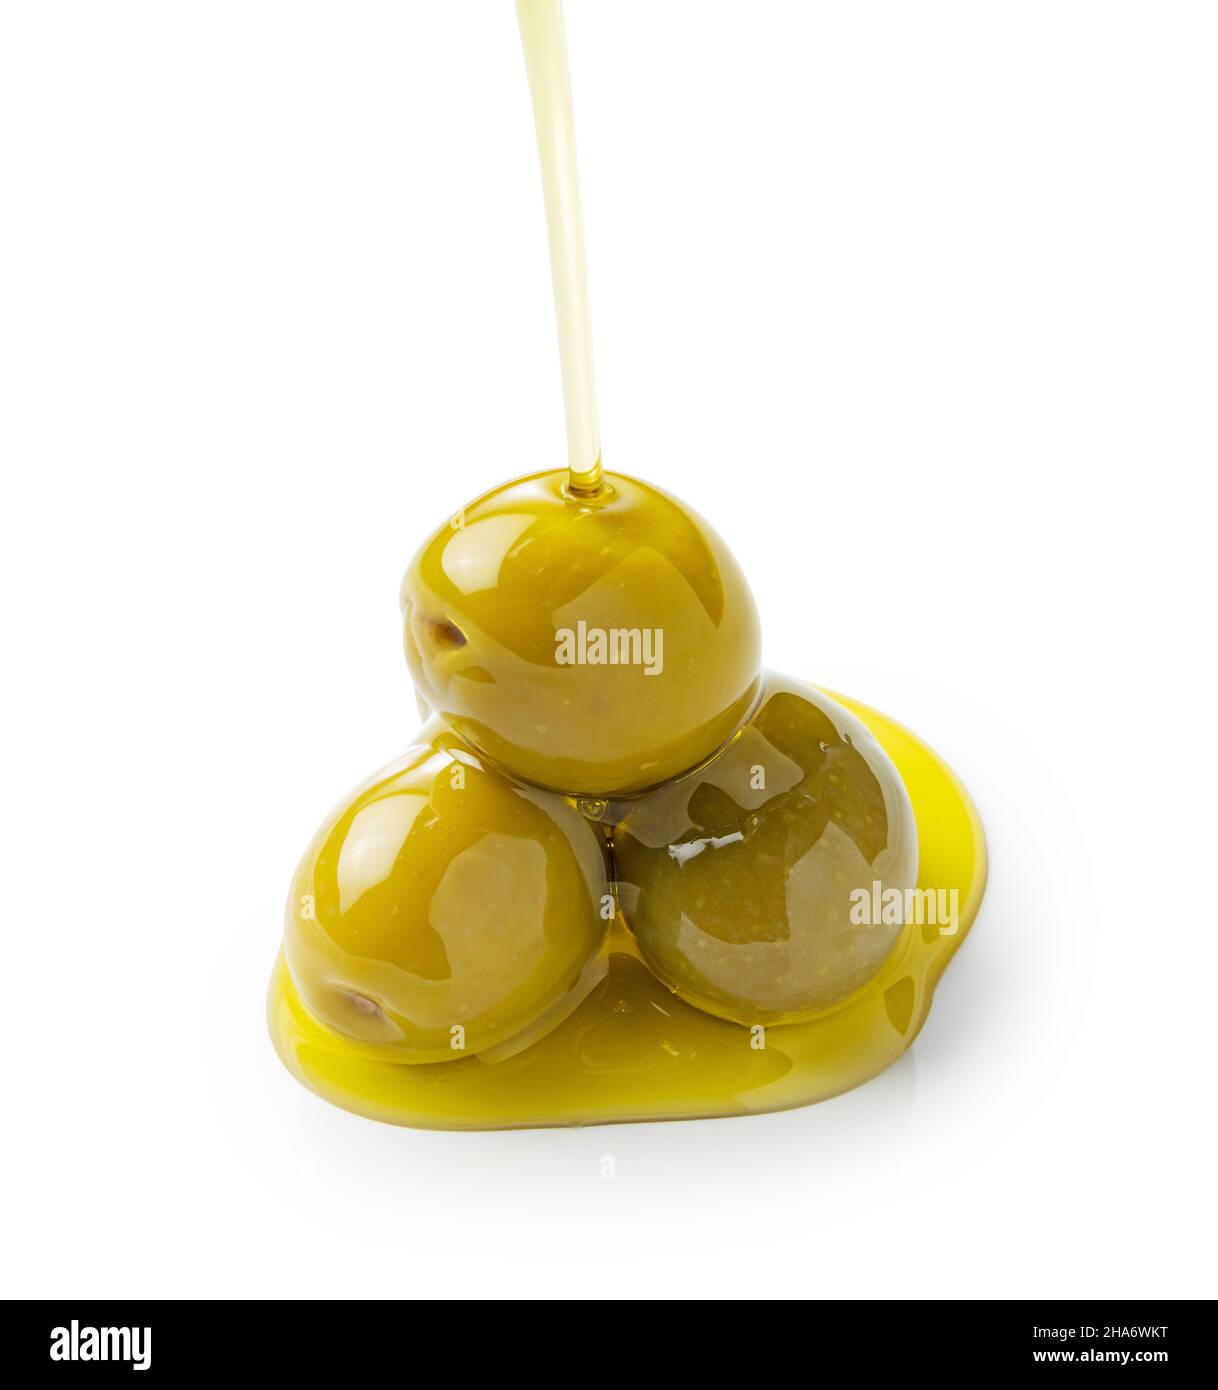 The moment when olive oil is poured over olives placed on a white background Stock Photo